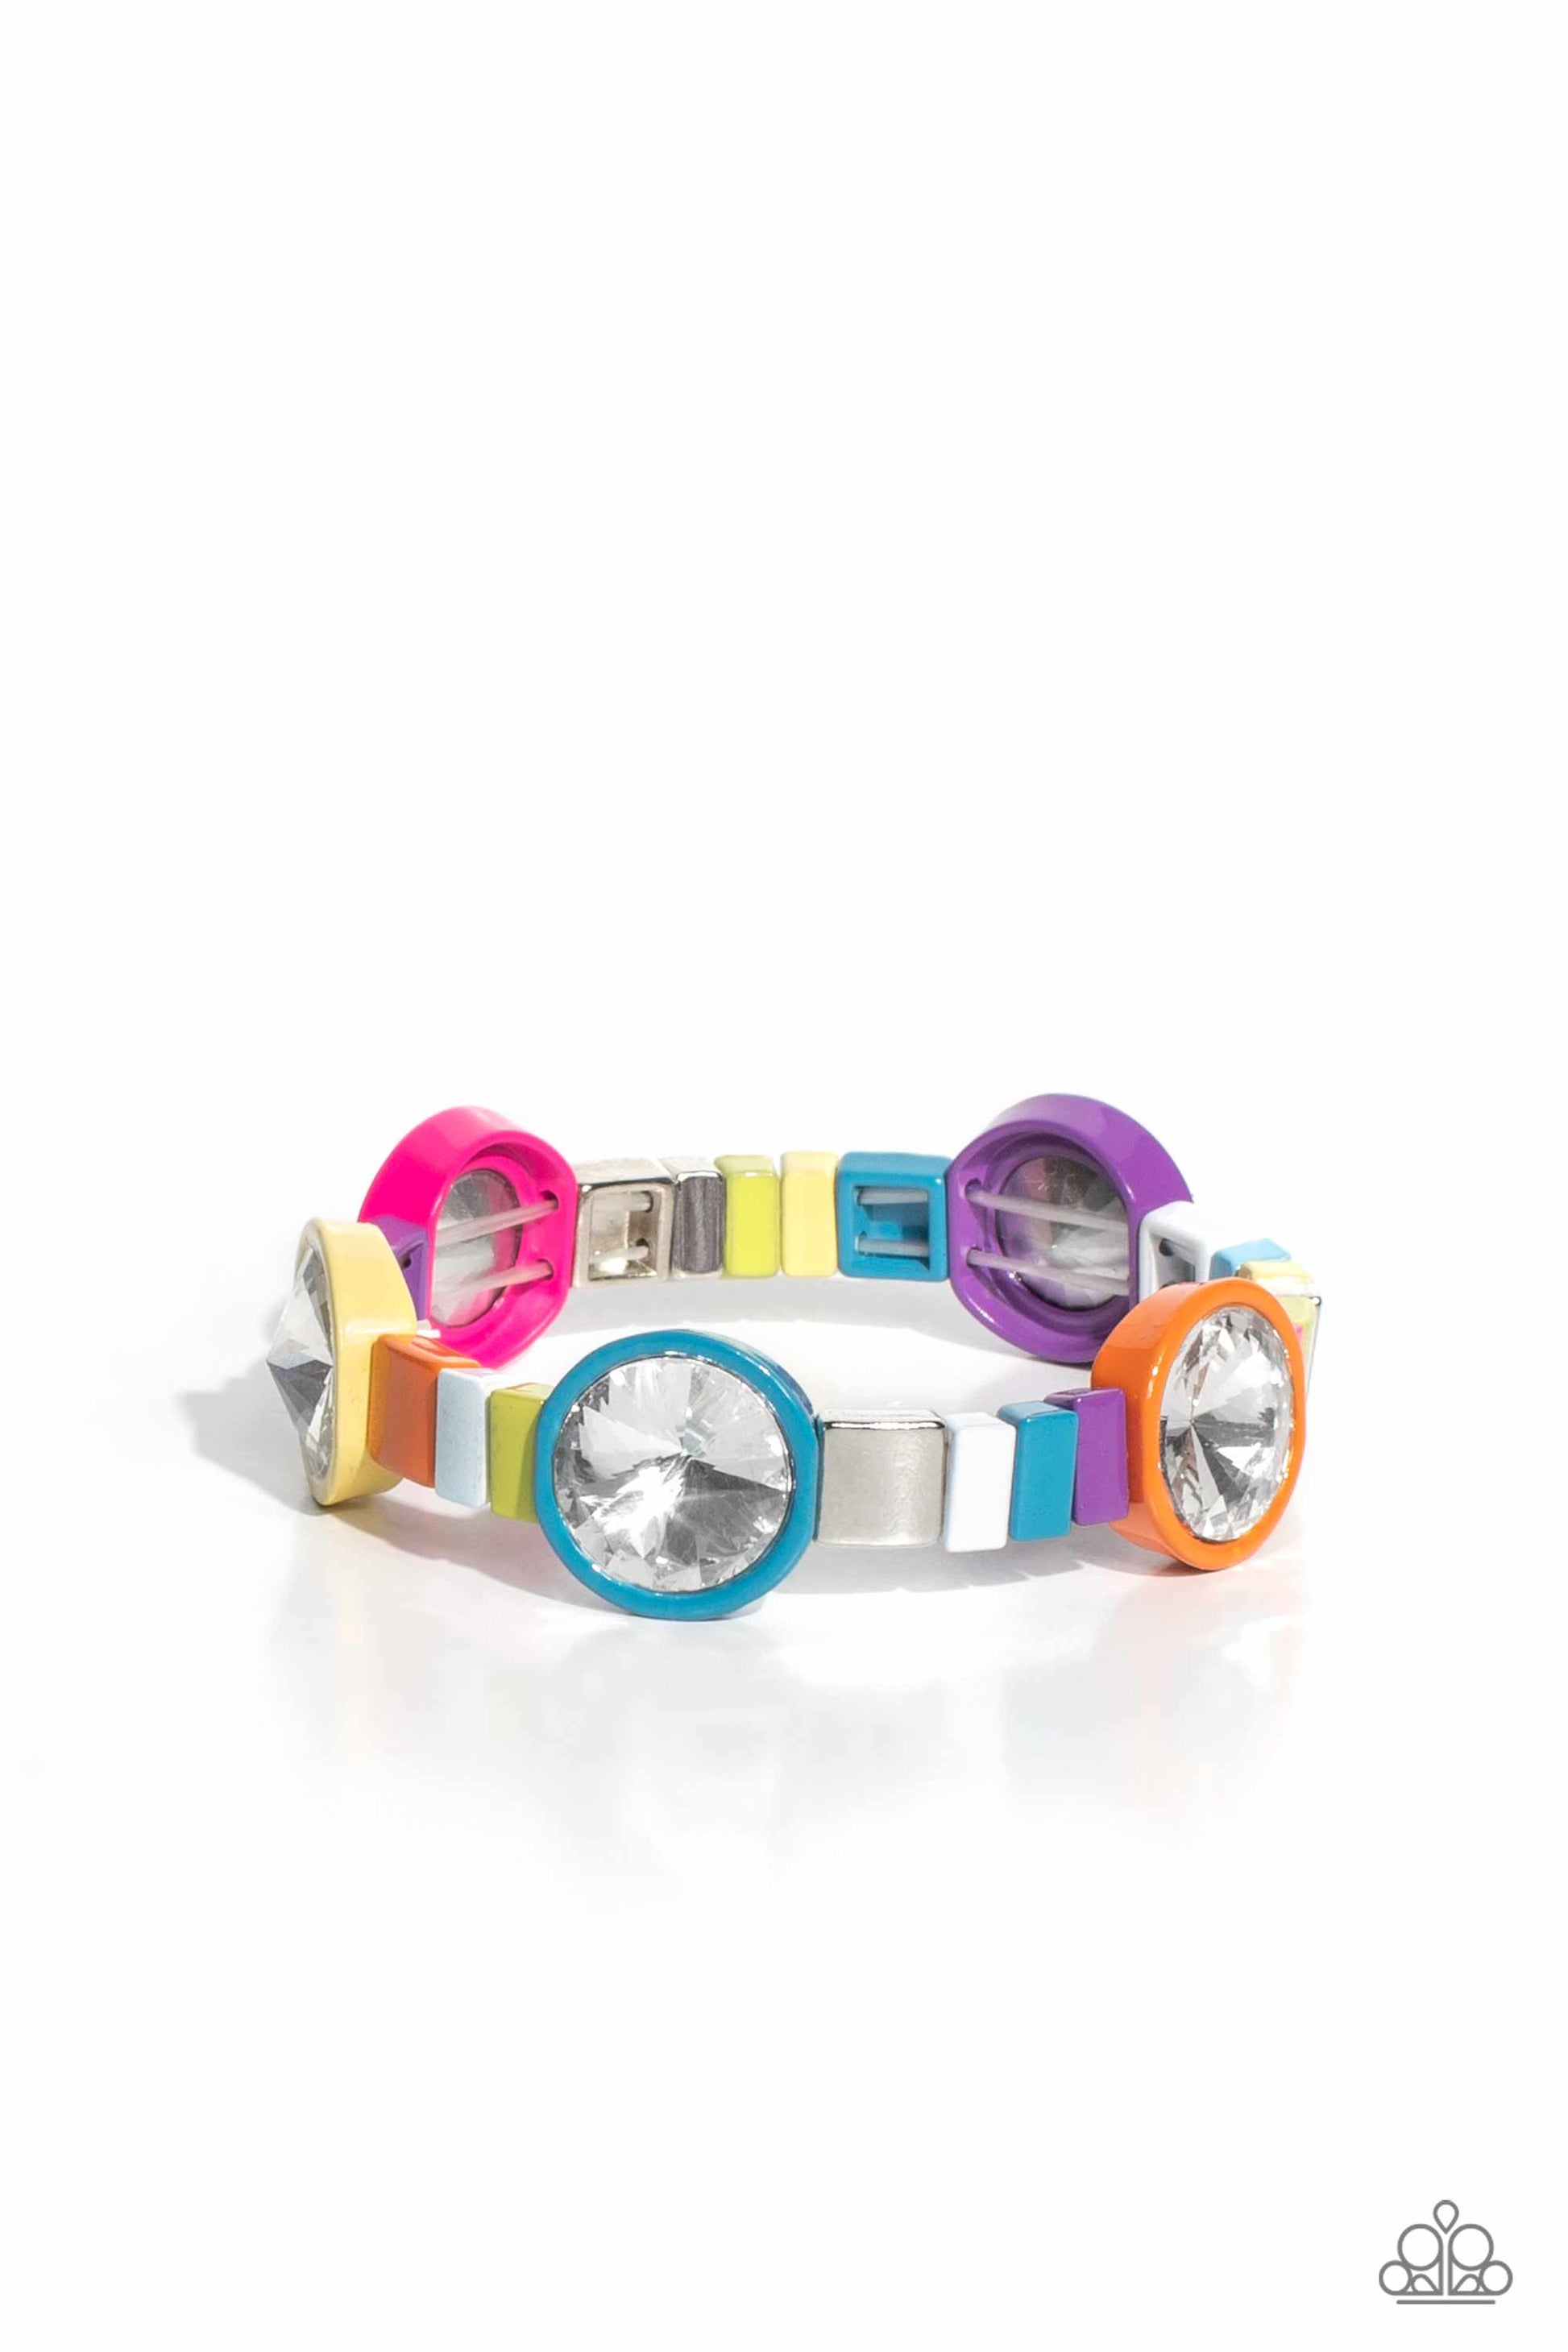 Paparazzi Accessories Multicolored Madness - Multi Strung along elastic stretchy bands, a bodacious collection of silver accents, and varying metallic accents dipped in multicolored shades encircle the wrist. Sporadically infused between the colorful disp